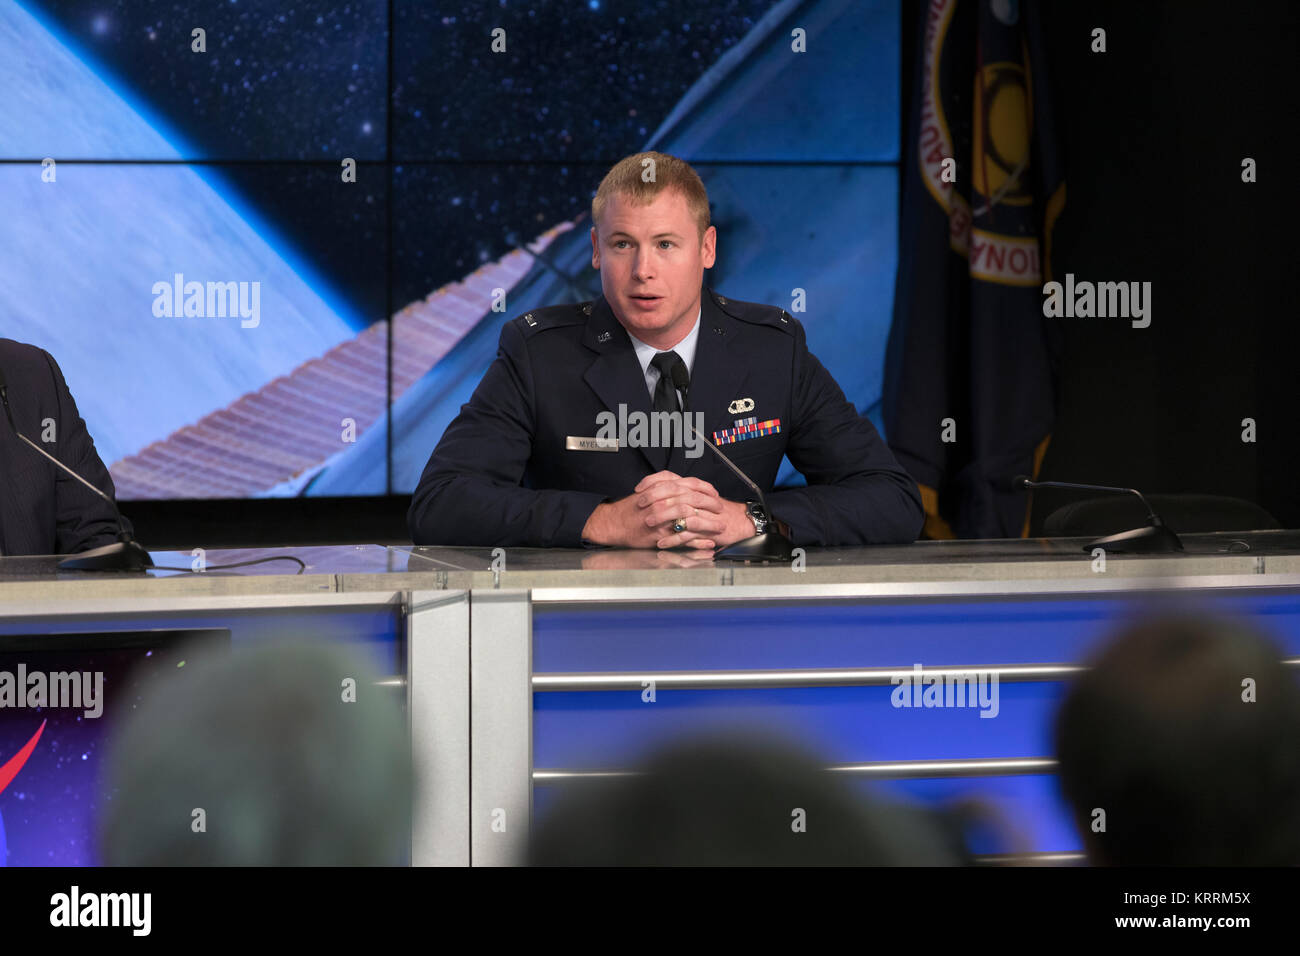 U.S. Air Force Weather Officer David Myers speaks during a pre-launch press conference for the SpaceX Falcon 9 rocket CRS-13 commercial resupply mission to the NASA International Space Station at the Kennedy Space Center Press Site Auditorium December 12, 2017 in Merritt Island, Florida. Stock Photo